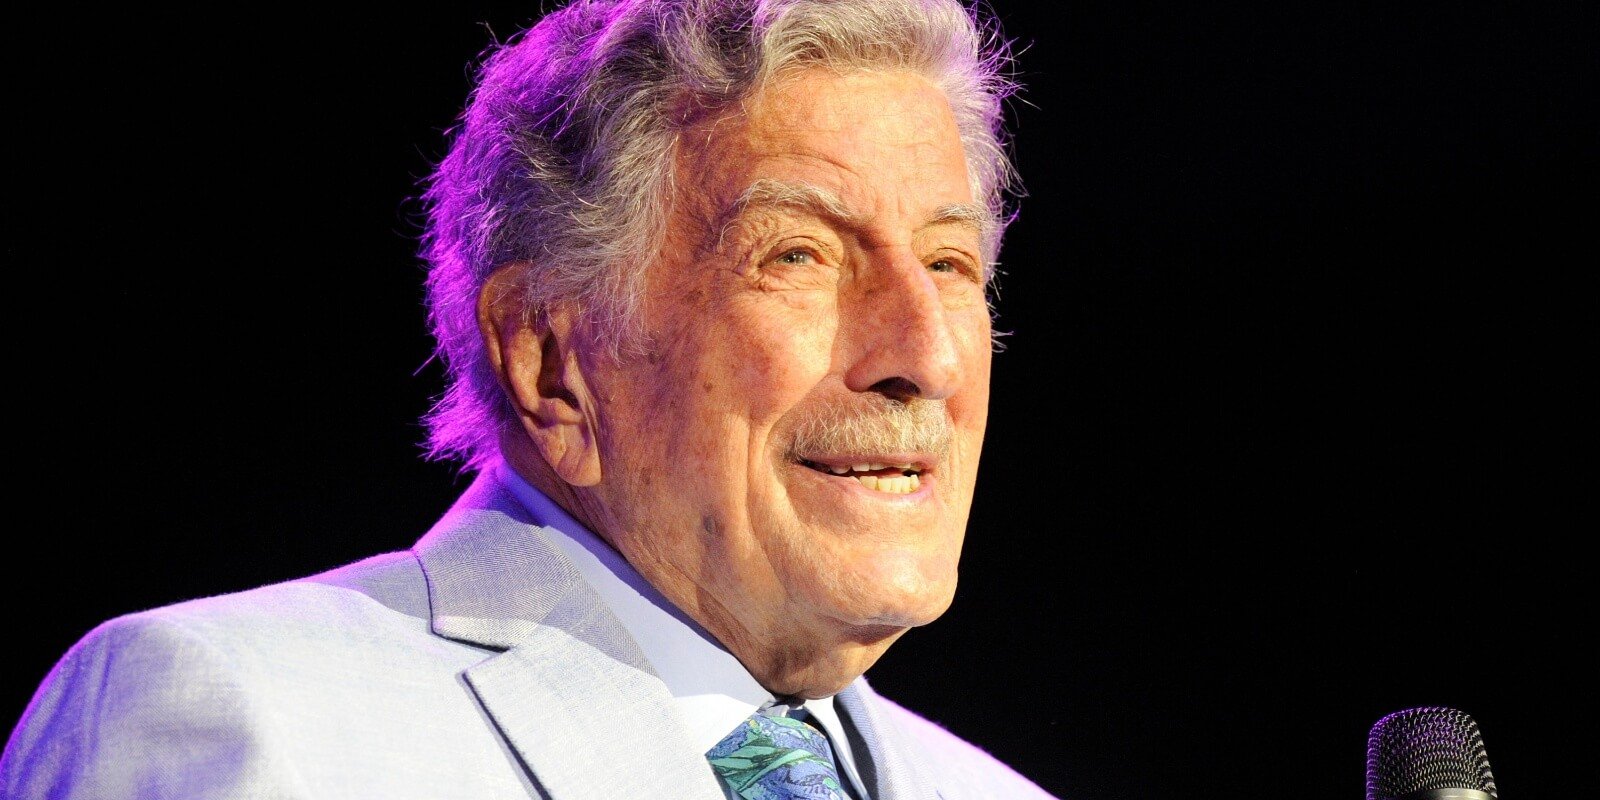 Tony Bennett performs on stage during an invitation only concert at the newly opened Encore Boston Harbor Casino in Everett, Massachusetts on August 8, 2019.